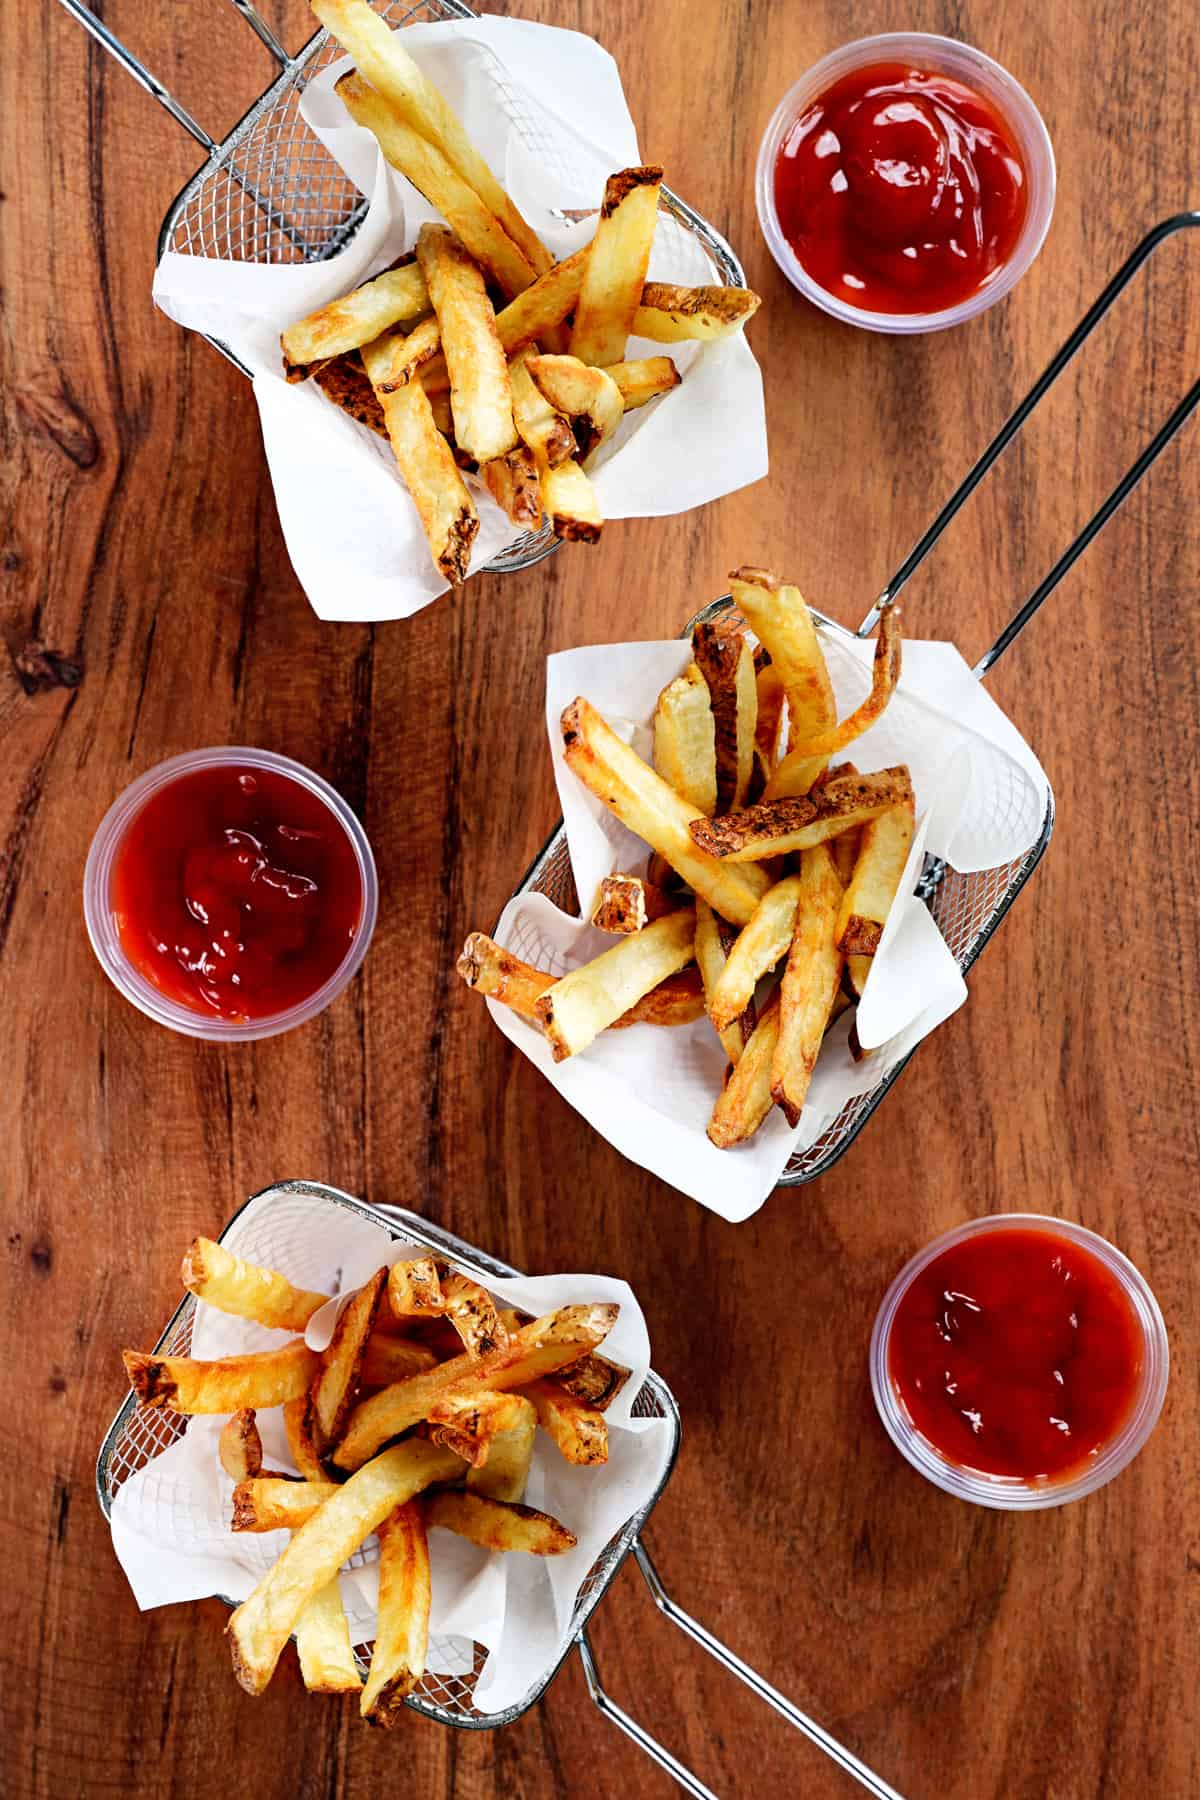 three wire baskets of air fryer french fries and containers of ketchup.